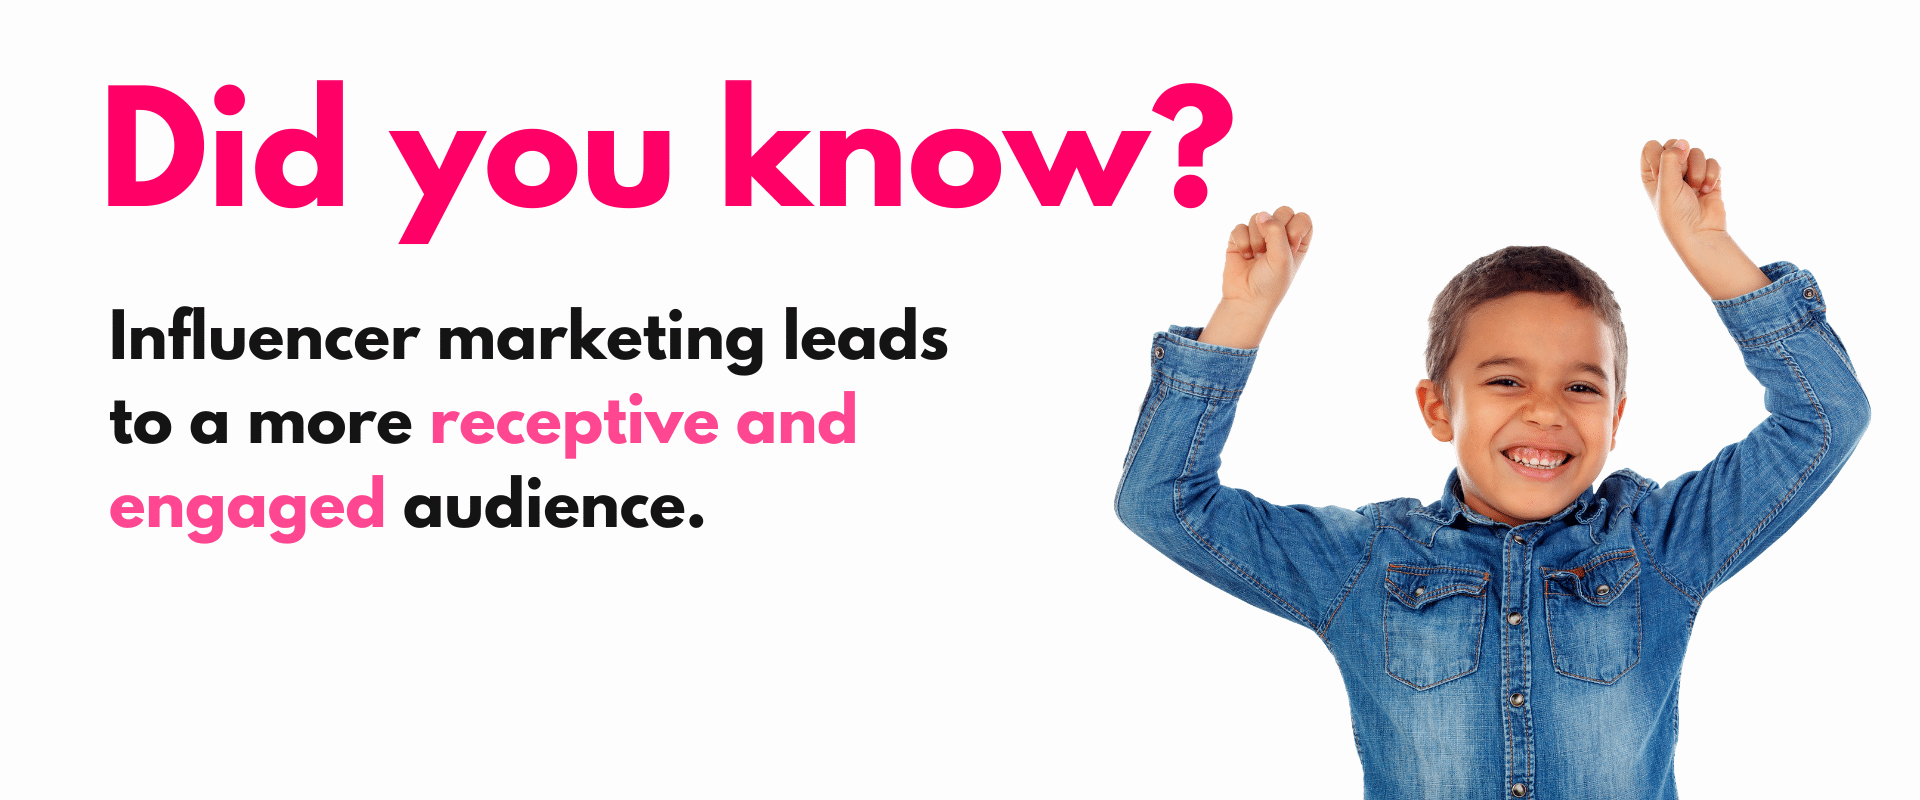 Did you know? influence marketing leads to a more engaged audience.